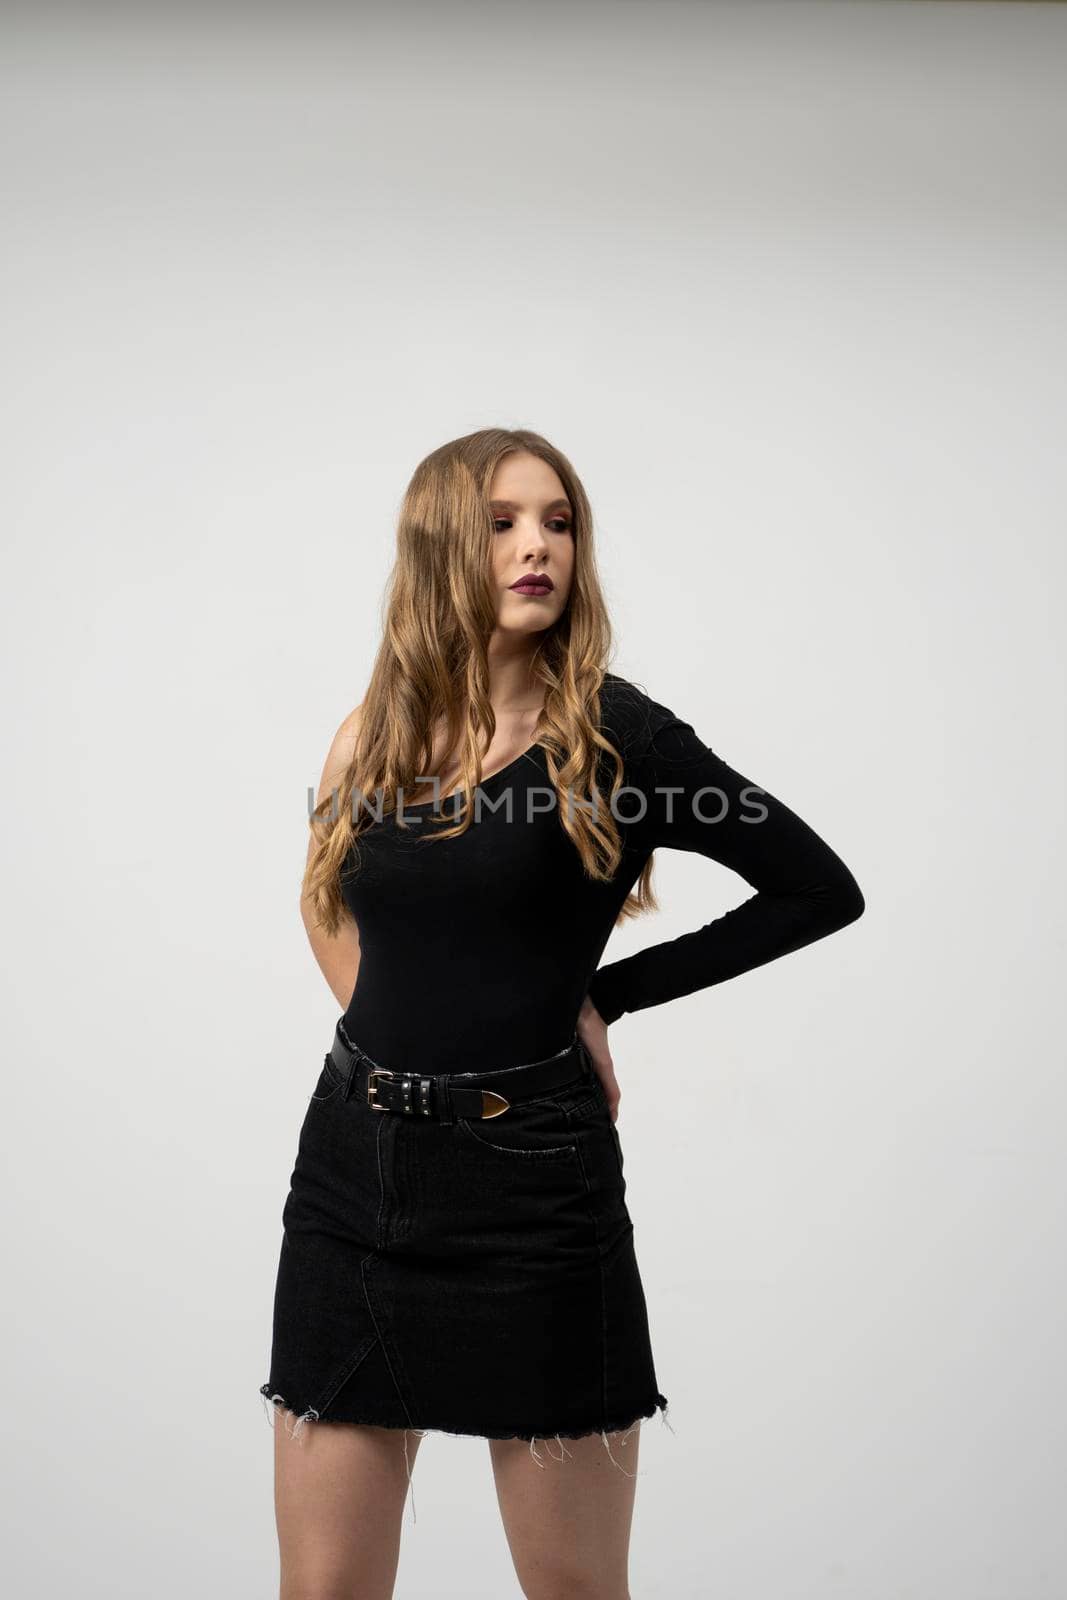 Beautiful young woman portrait in a black t-shirt and mini skirt. Studio shot, isolated on gray background